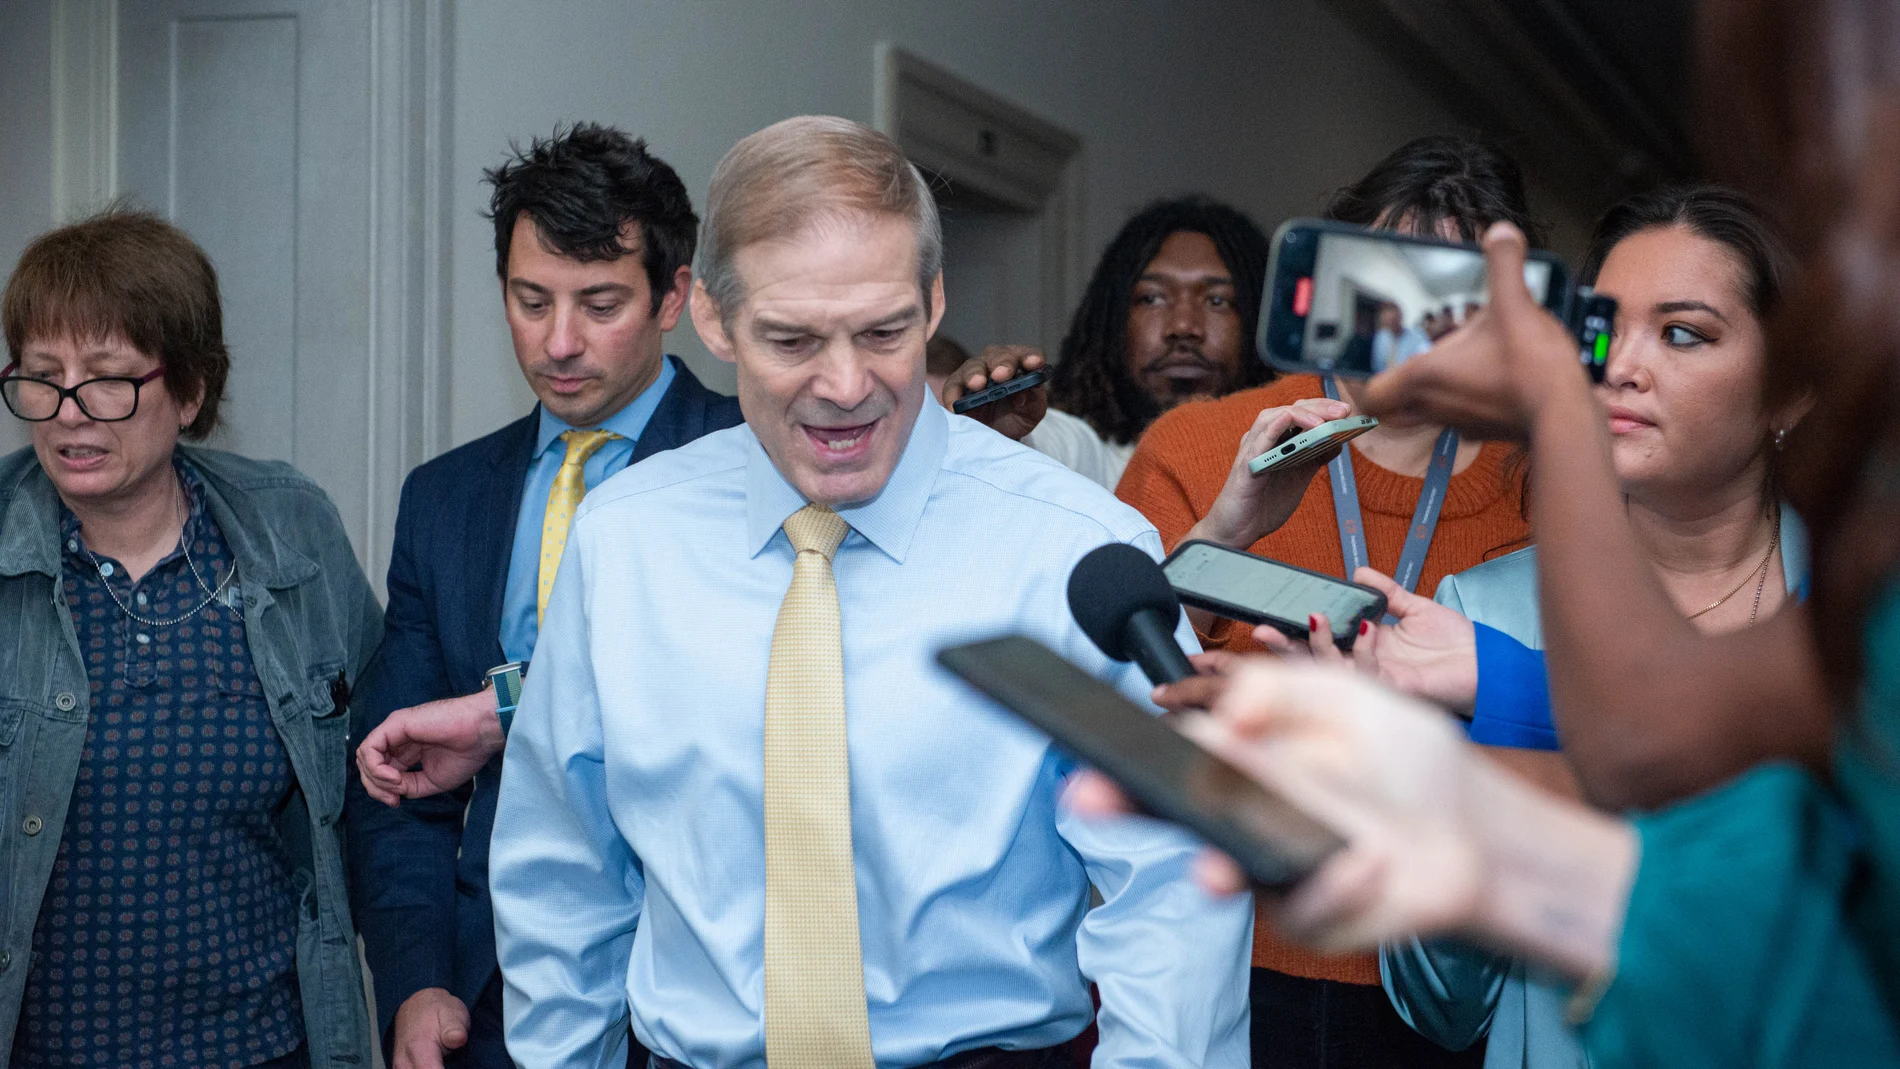 October 13, 2023, Washington, District of Columbia, USA: United States Representative Jim Jordan (Republican of Ohio) talks to press in the midst of another GOP caucus in the Longworth House Office Building on Friday, October 13, 2023. The meeting is set to determine their new nomination for Speaker after United States House Majority Leader Steve Scalise (Republican of Louisiana) dropped out of the race last night. Currently, the only person running is United States Representative Jim Jordan ...